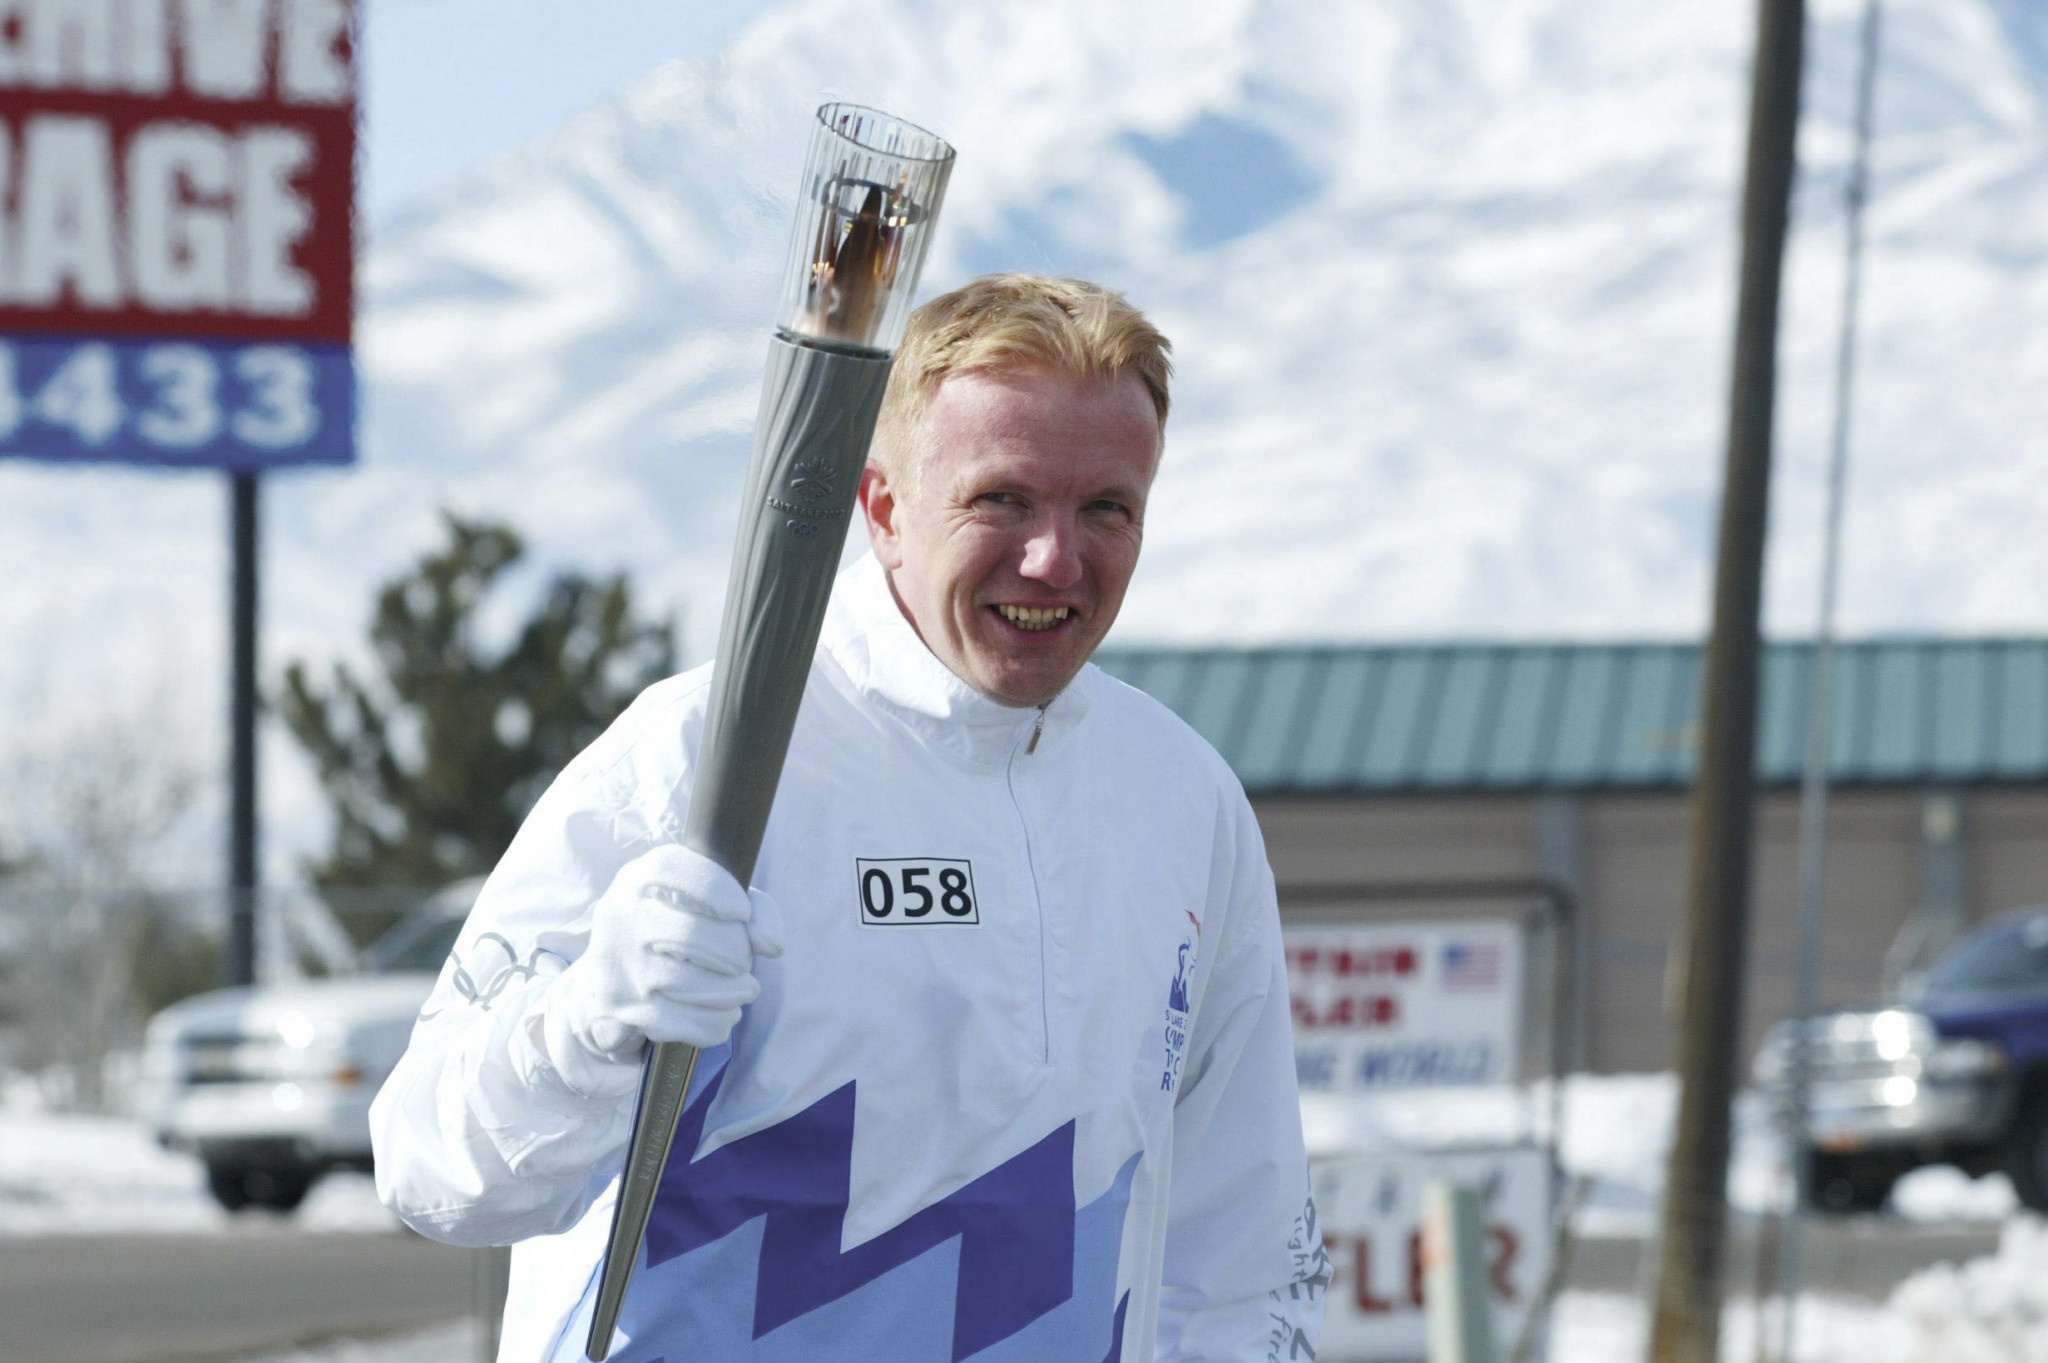 Roland Baar pictured carrying the Olympic Torch before the Salt Lake City 2002 Olympics ©Getty Images